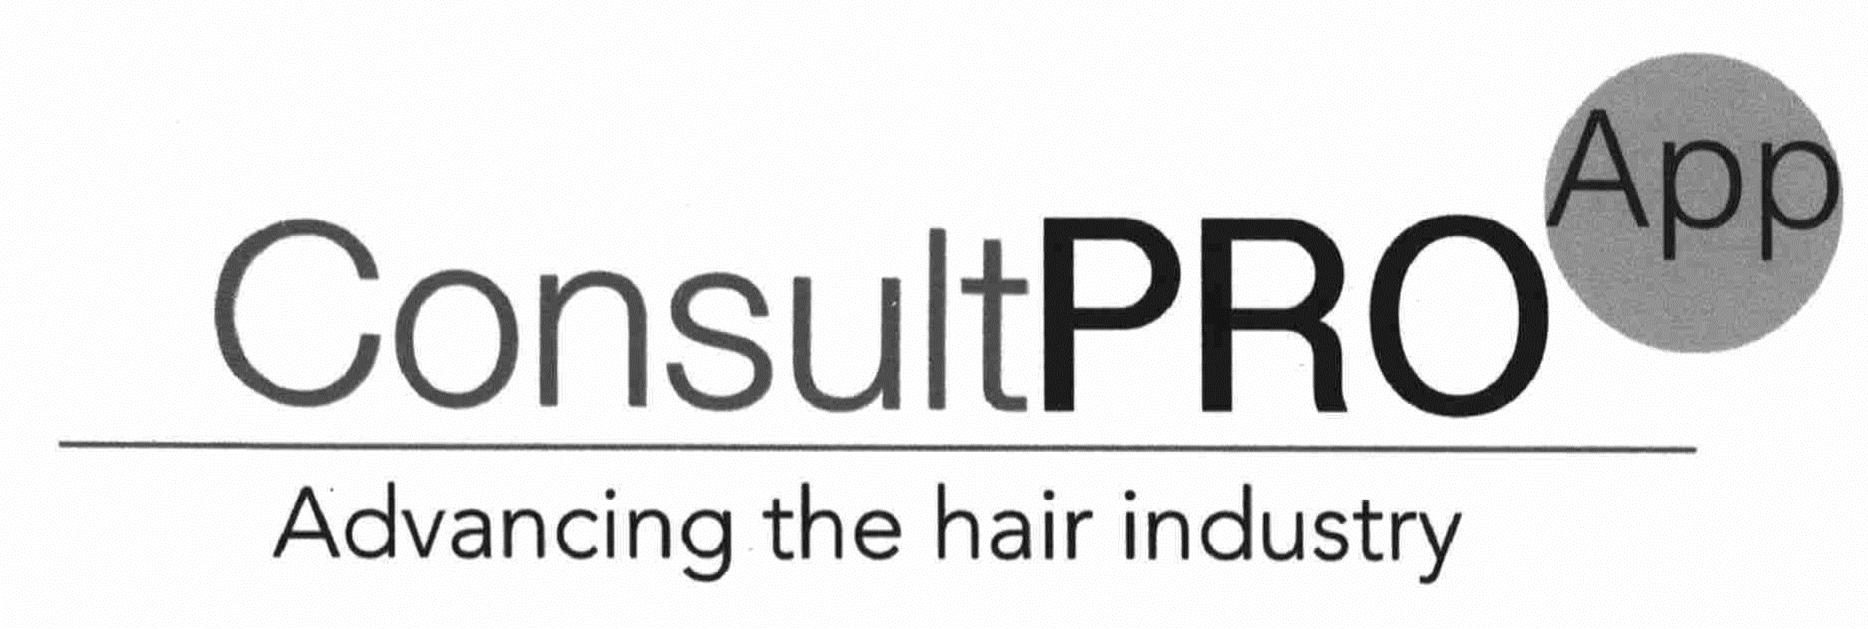  CONSULTPRO APP ADVANCING THE HAIR INDUSTRY